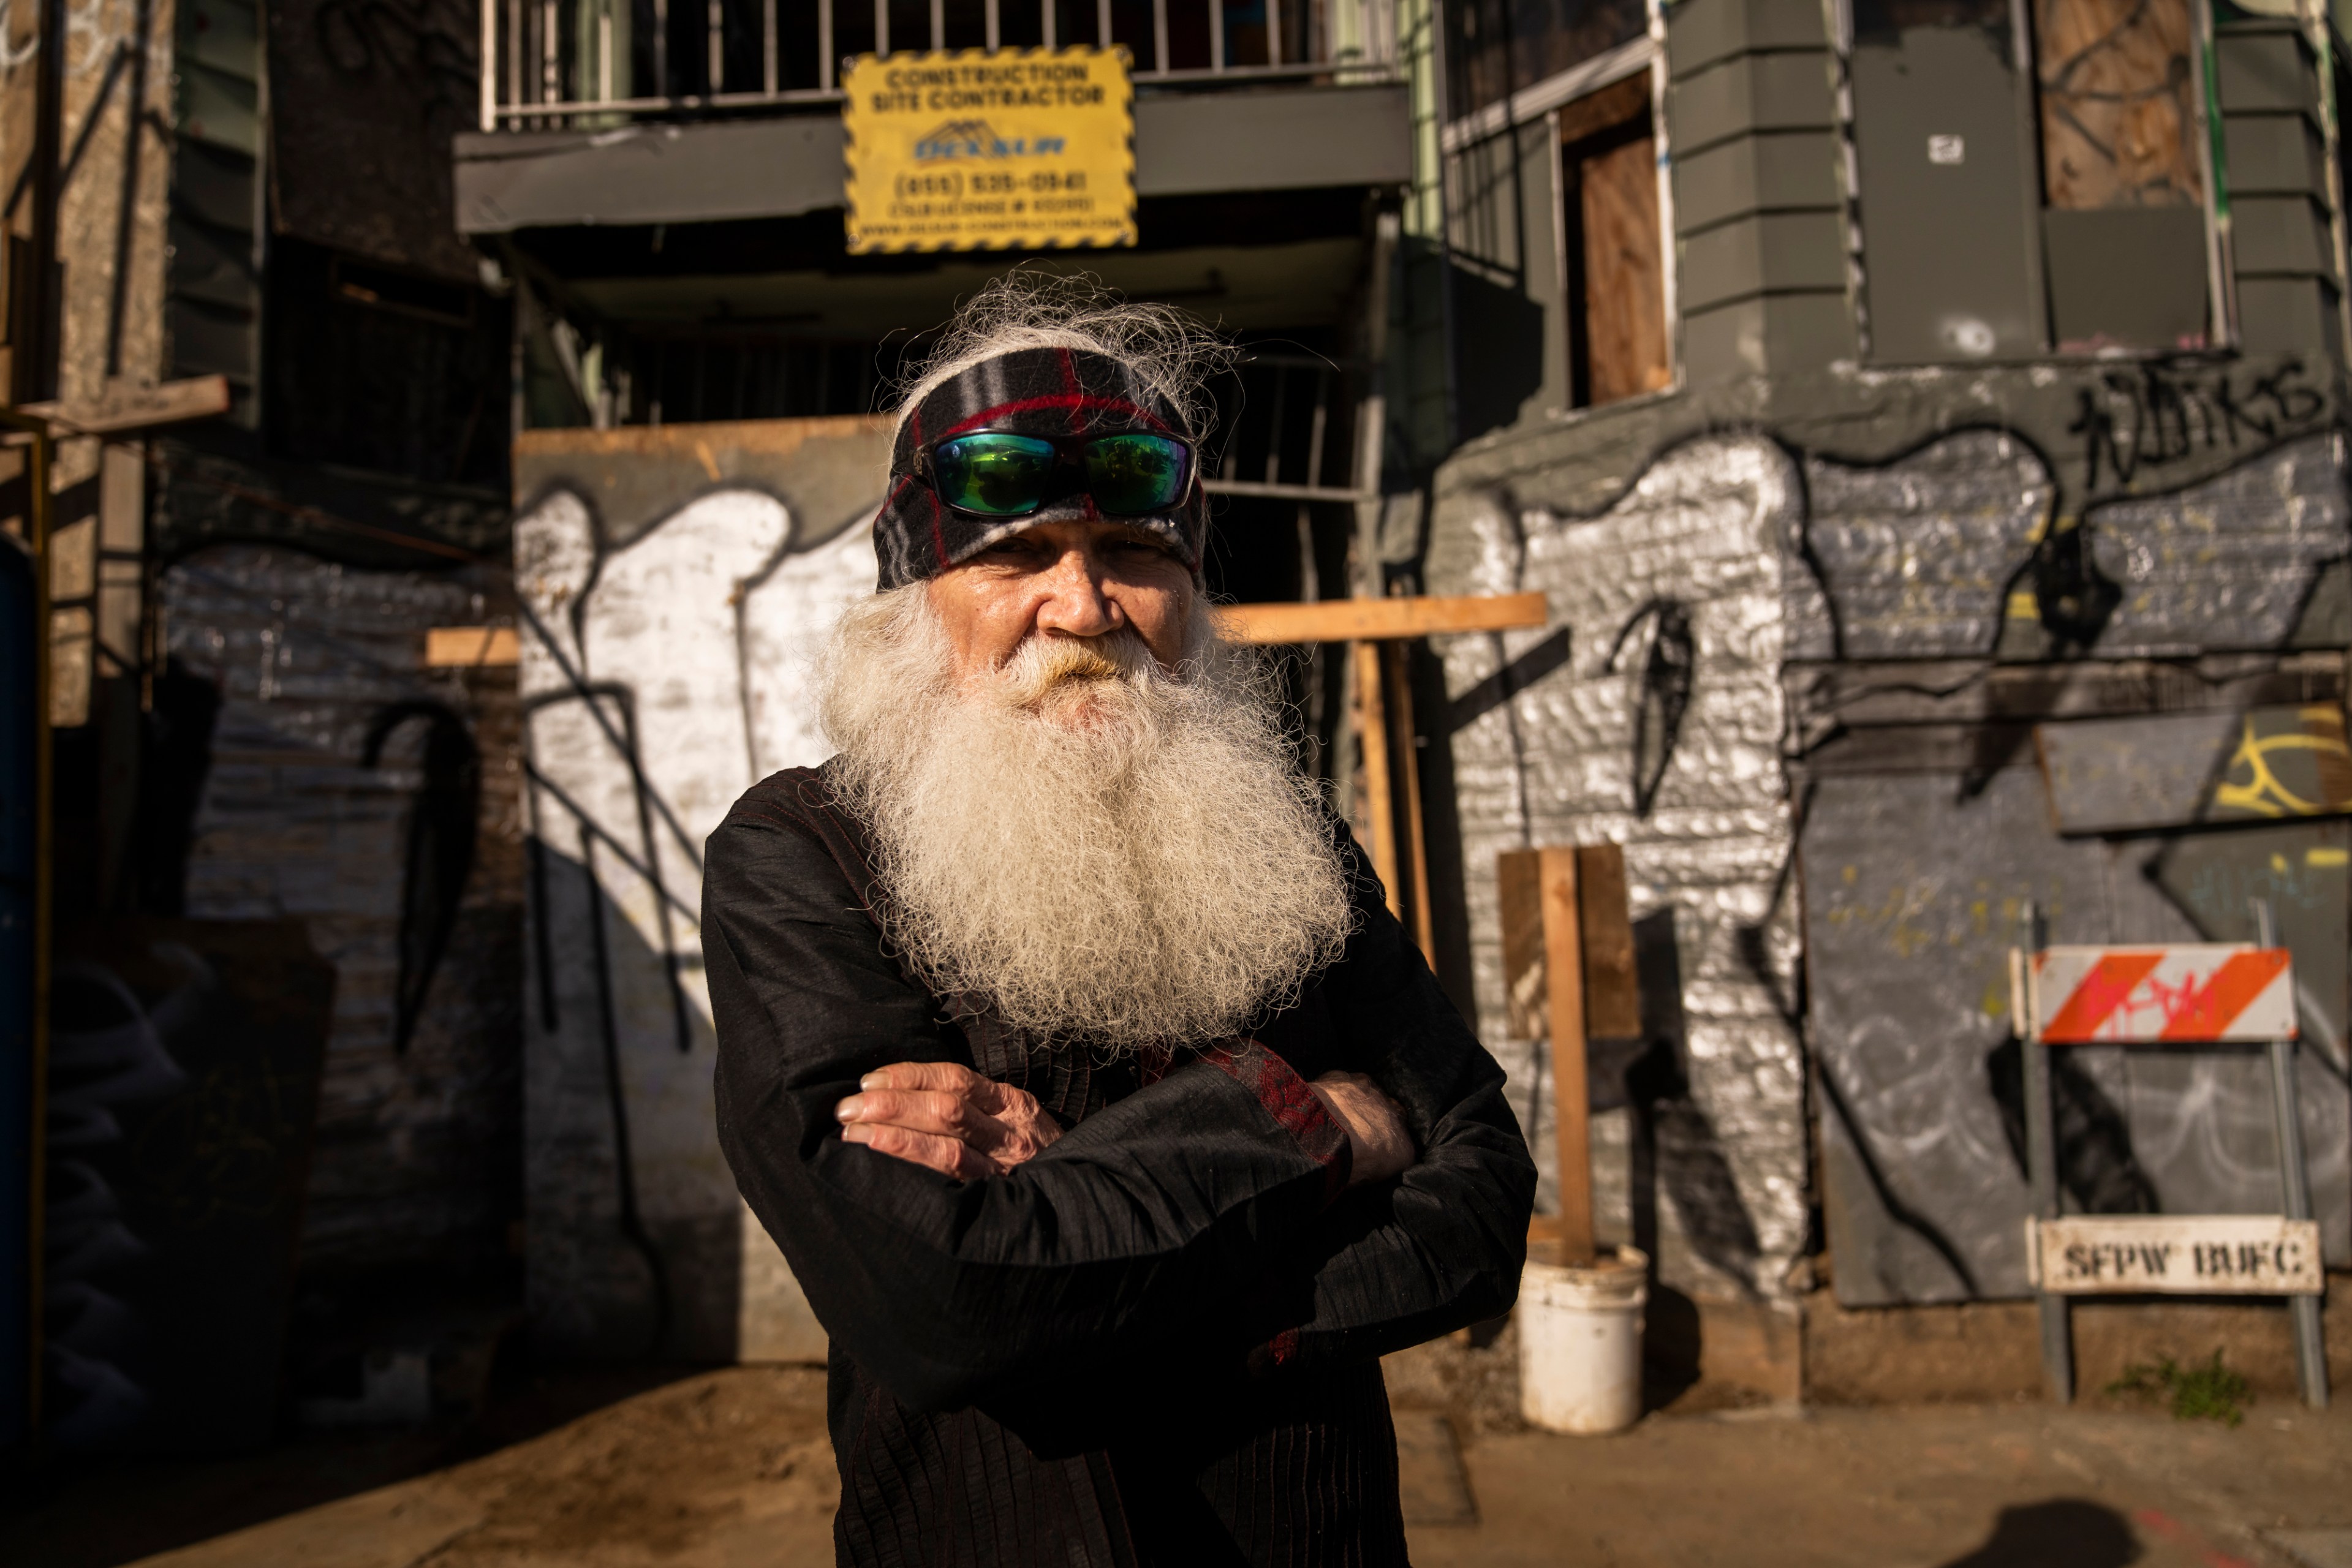 An elder man with a voluminous white beard, wearing sunglasses and a bandana, stands confidently with crossed arms against an urban backdrop with graffiti.